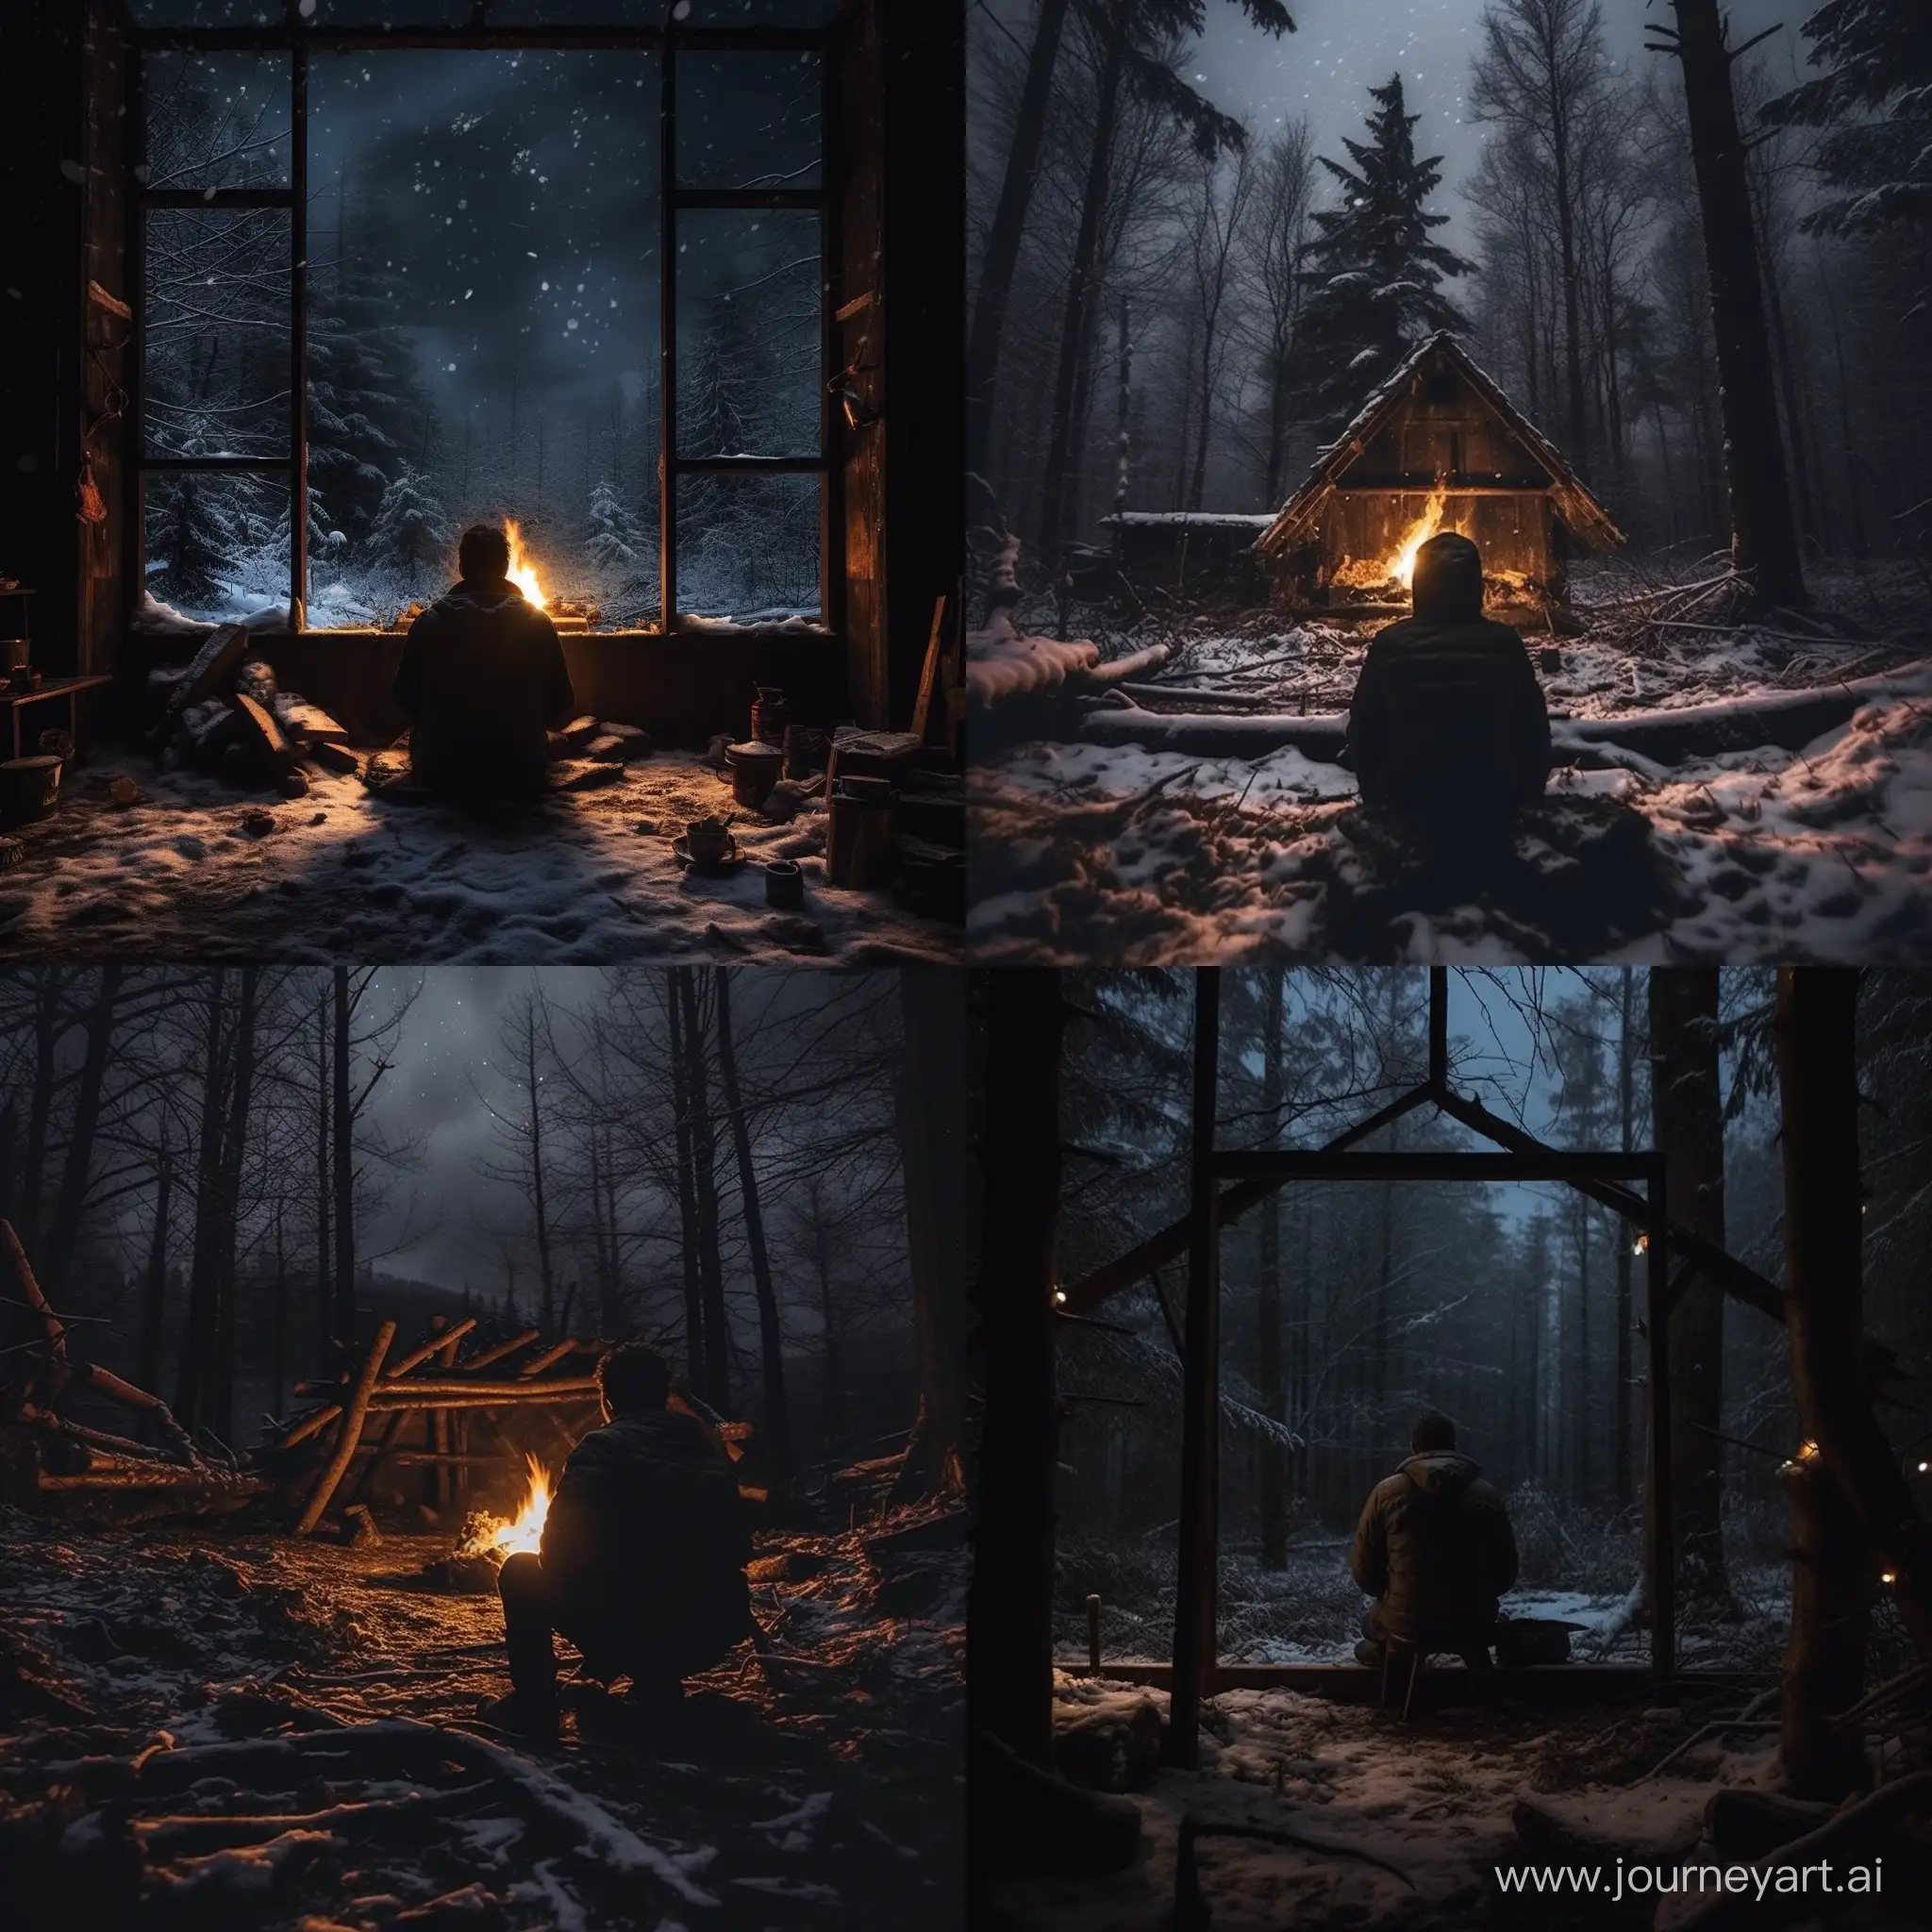 Solitude-in-a-Snowy-Forest-Hut-Reflecting-on-Memories-by-the-Fireplace